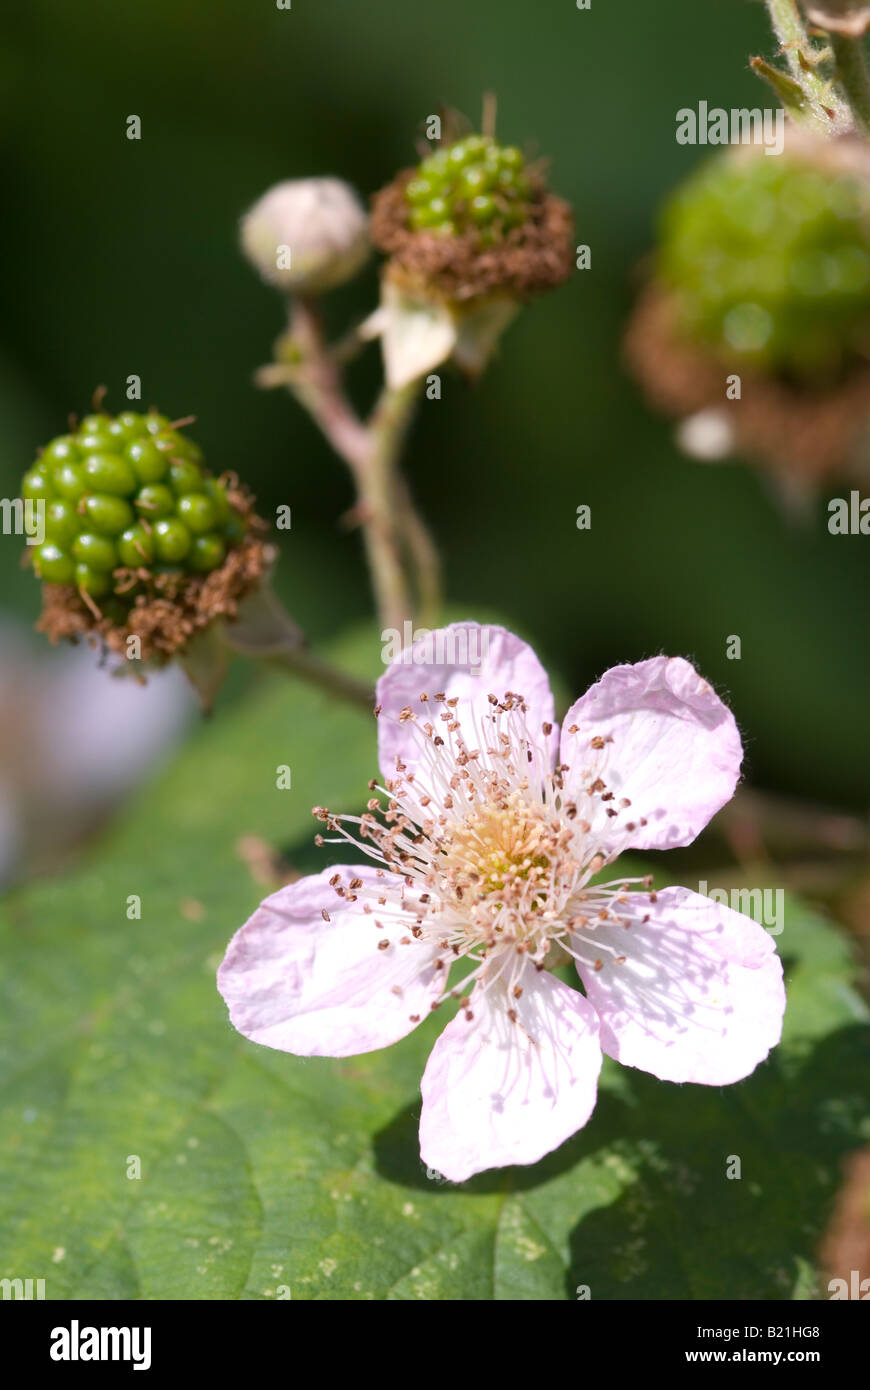 wild blackberry in with flower with unripe, green berry Stock Photo